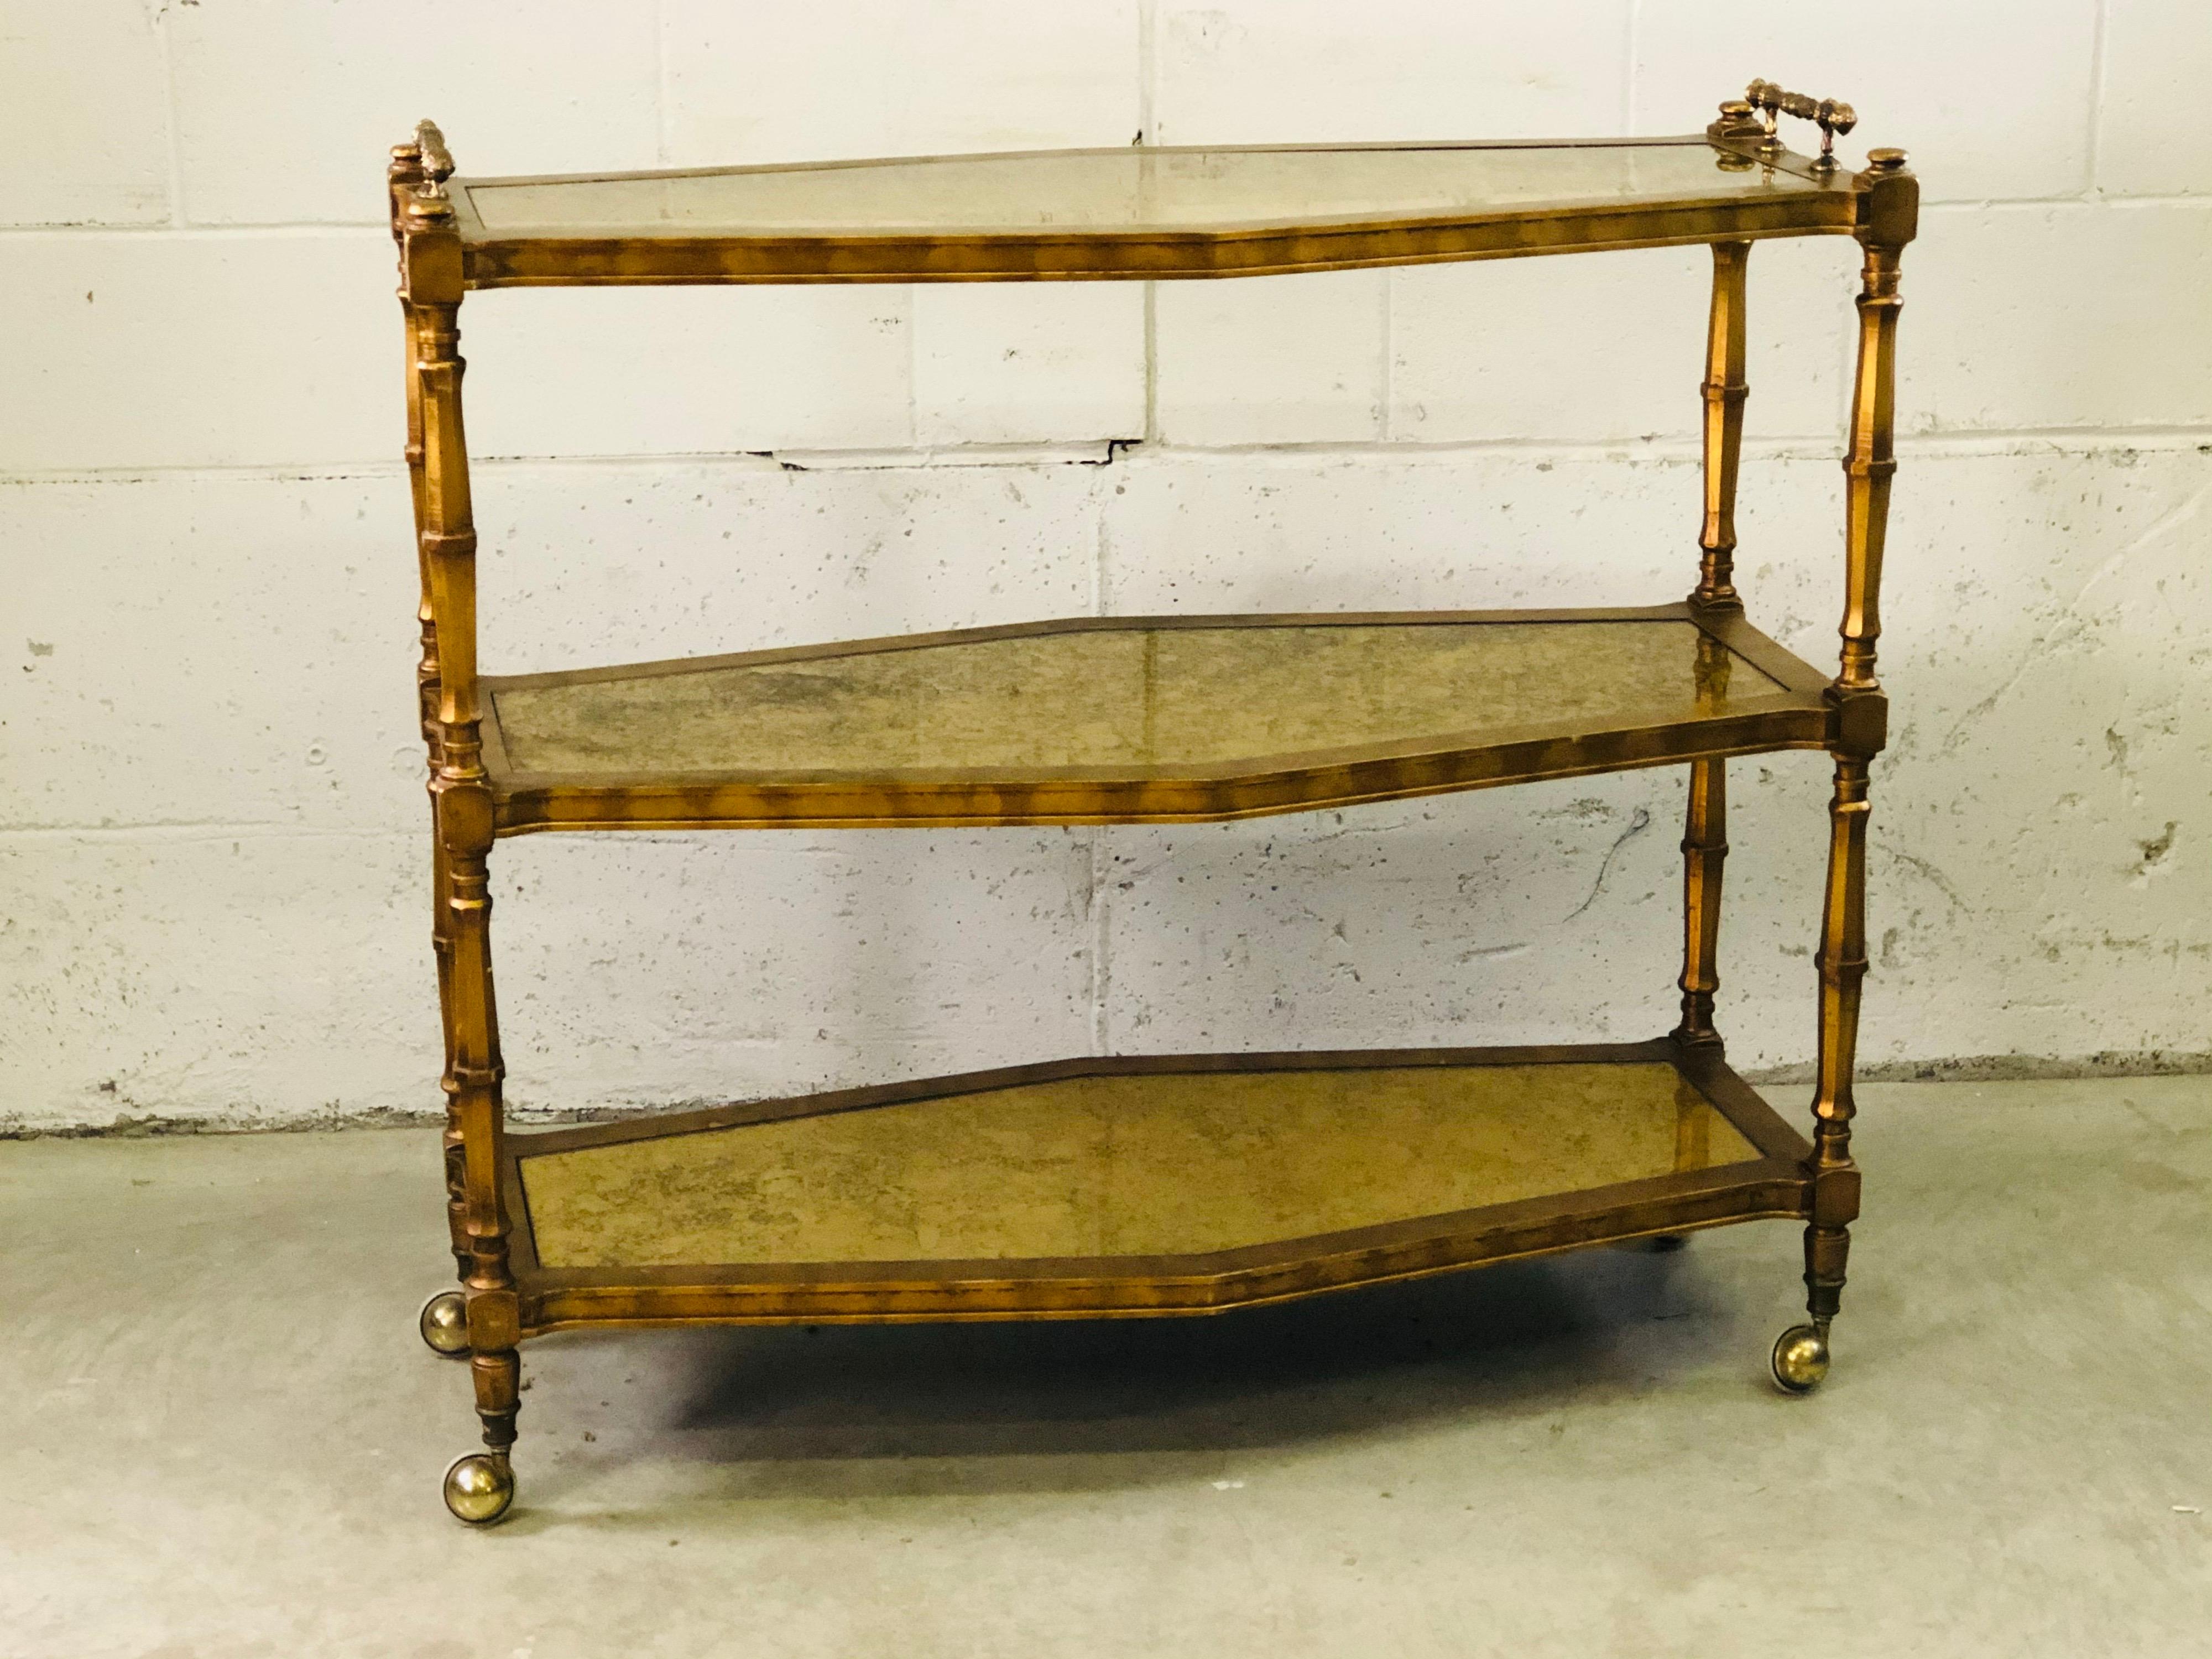 Vintage 1960s Italian three-tier rolling serving cart with gold glass inserts and ornate metal handles. The cart has matching gold paint on the wood and the castors roll perfectly. No marks